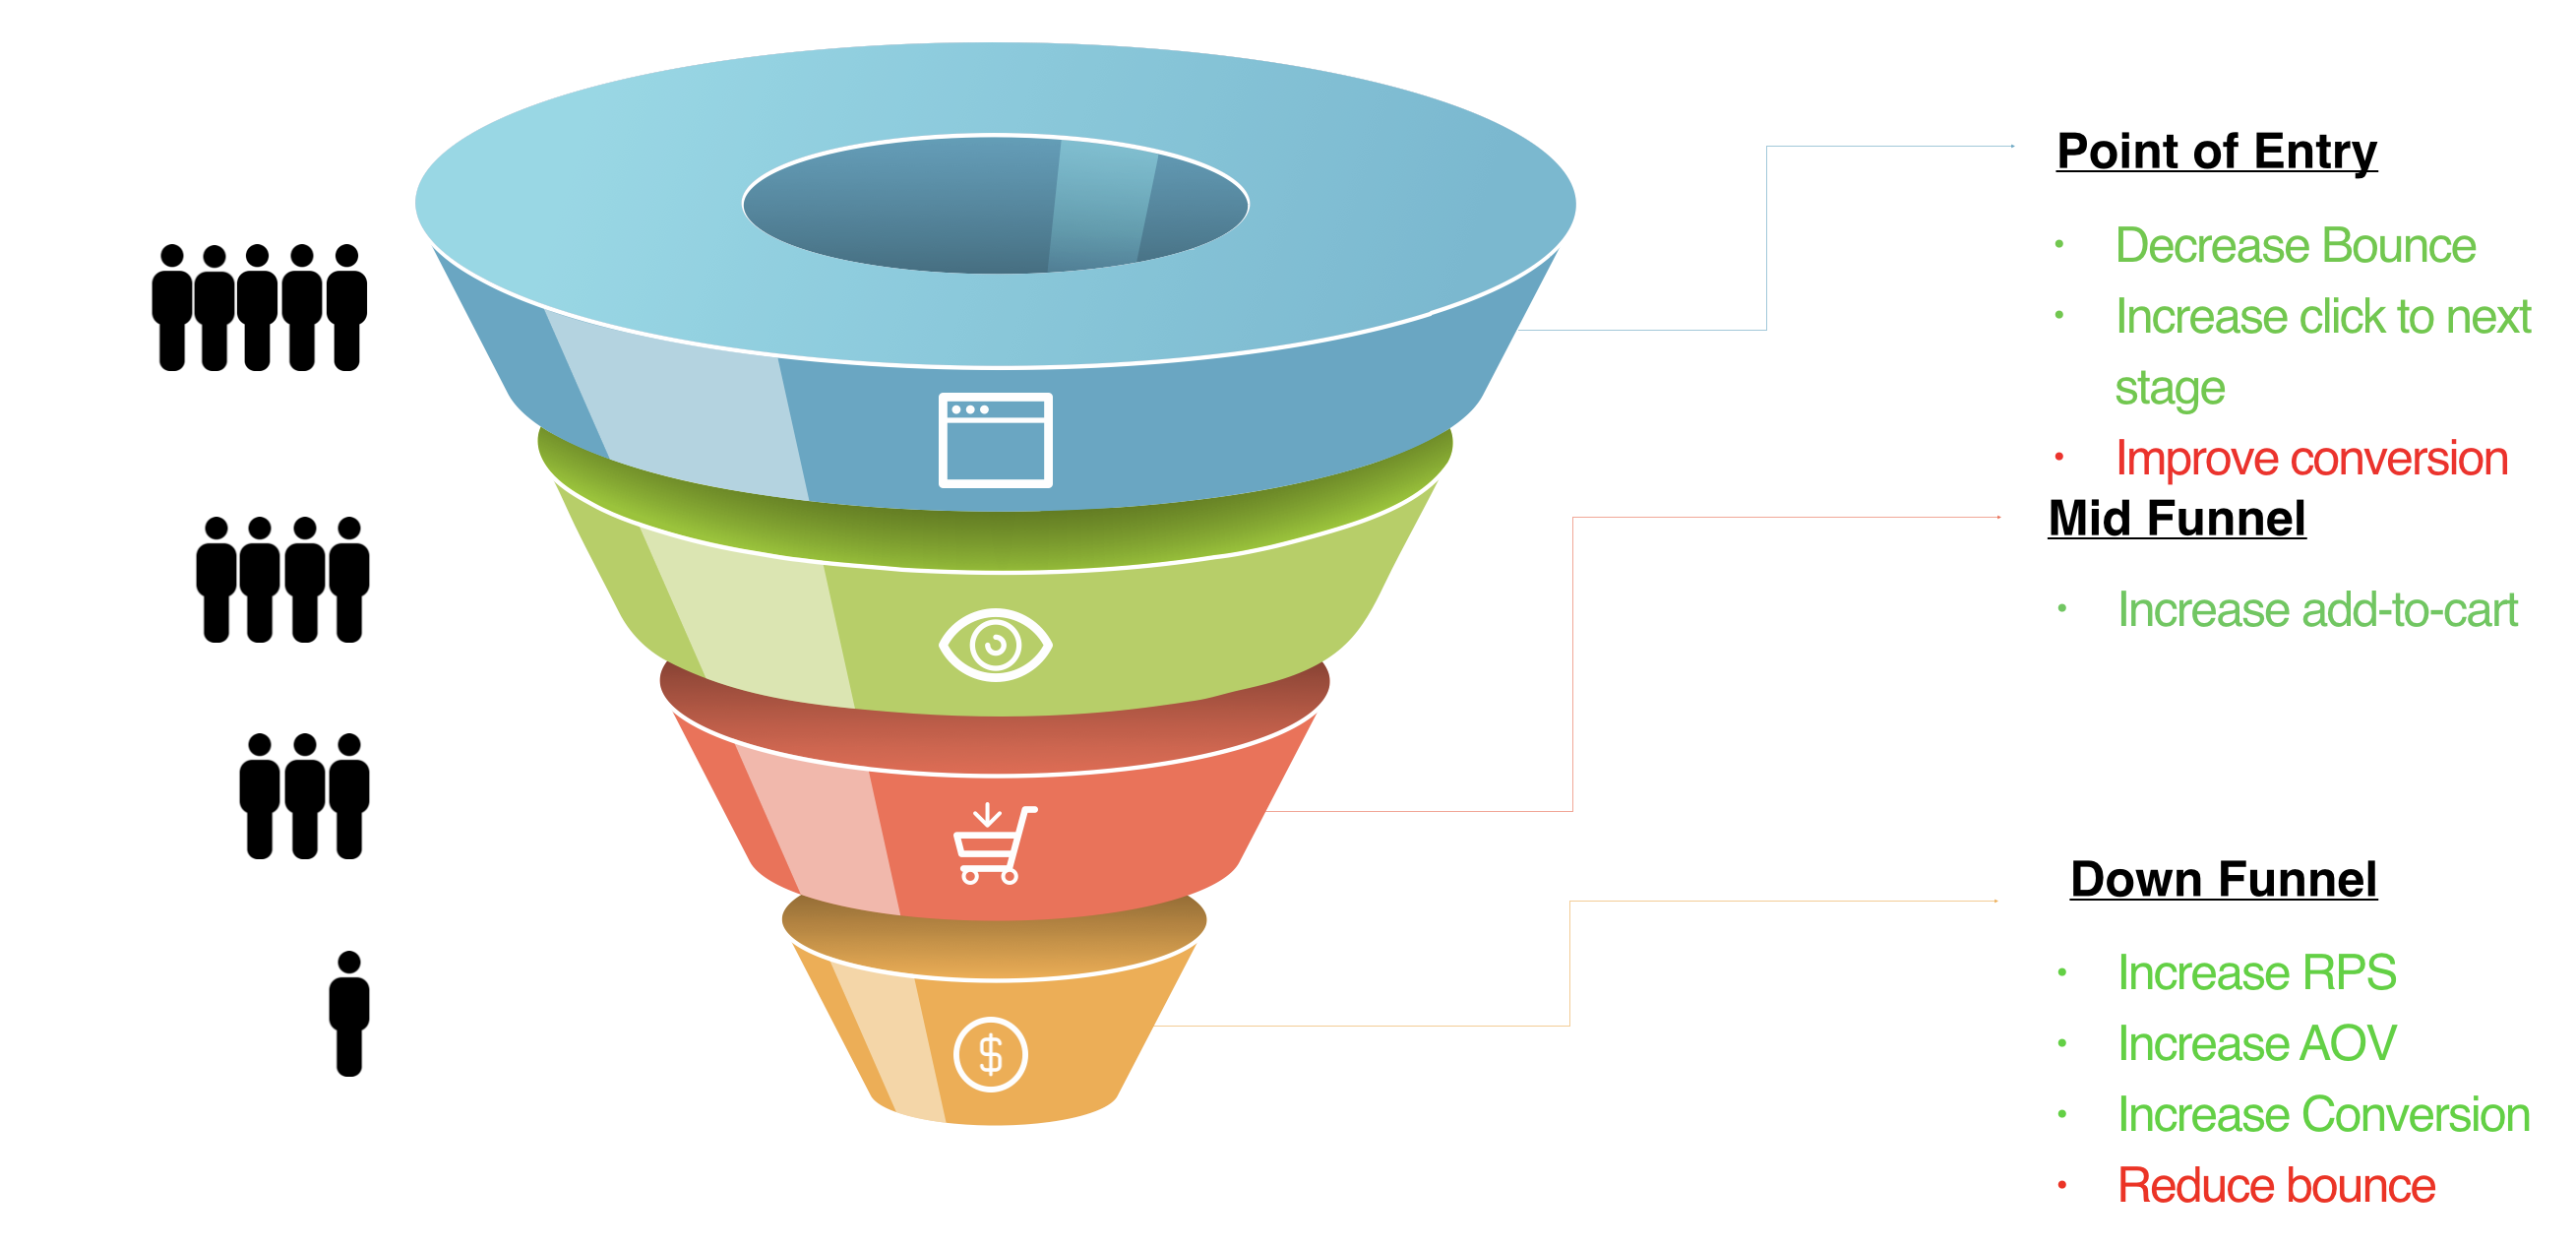 Illustration of a customer purchase journey funnel with the key performance indicators for each stage noted